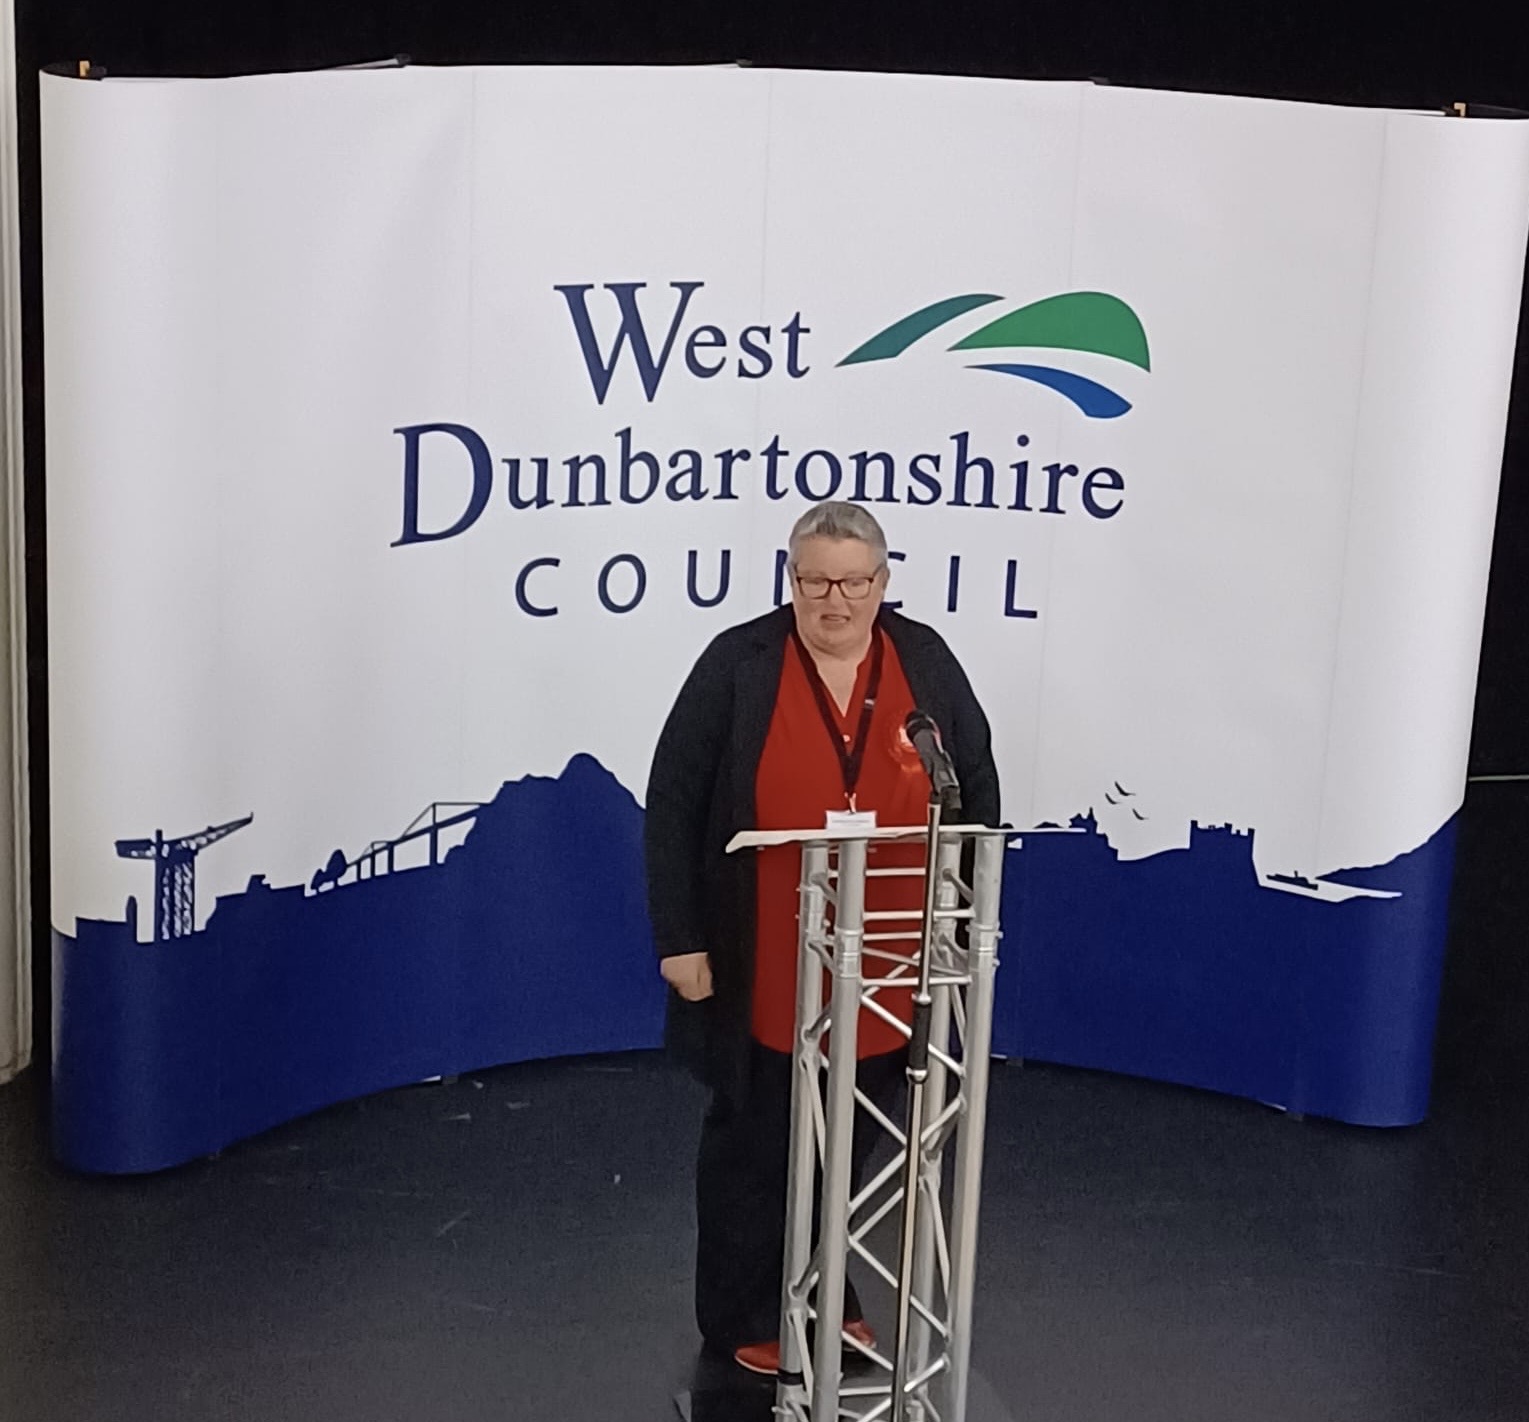 Woman standing on stage in front of West Dunbartonshire Council logo